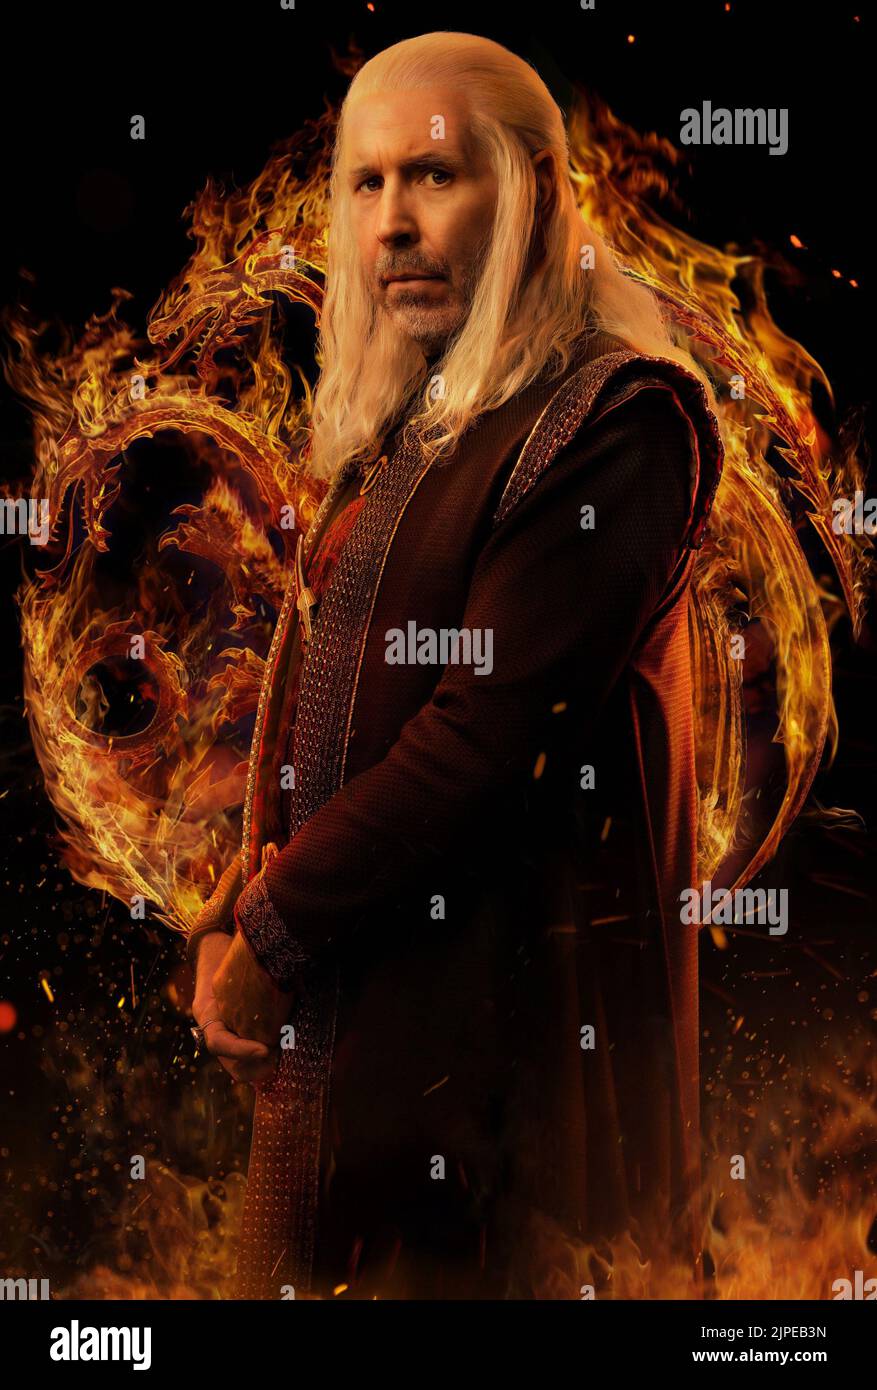 USA. Paddy Considine  in the (C)HBO new series: House of the Dragon (2022).  Plot: The story of the House Targaryen set 300 years before the events of Game of Thrones (2011).  Ref: LMK106-J8255-150822 Supplied by LMKMEDIA. Editorial Only. Landmark Media is not the copyright owner of these Film or TV stills but provides a service only for recognised Media outlets. pictures@lmkmedia.com Stock Photo